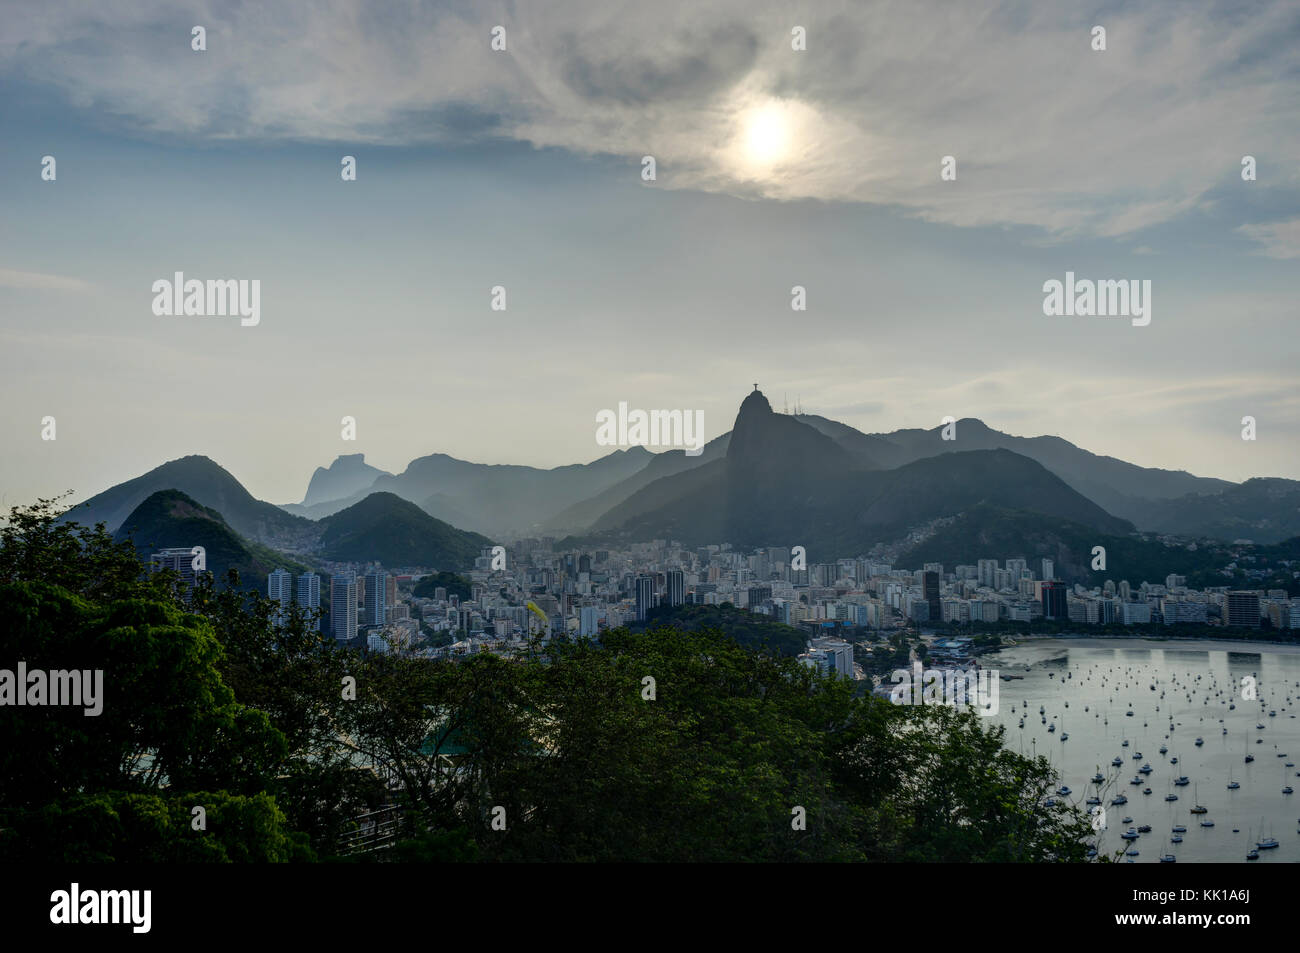 TYBA ONLINE :: Subject: View of the Rio de Janeiro Yacht Club from